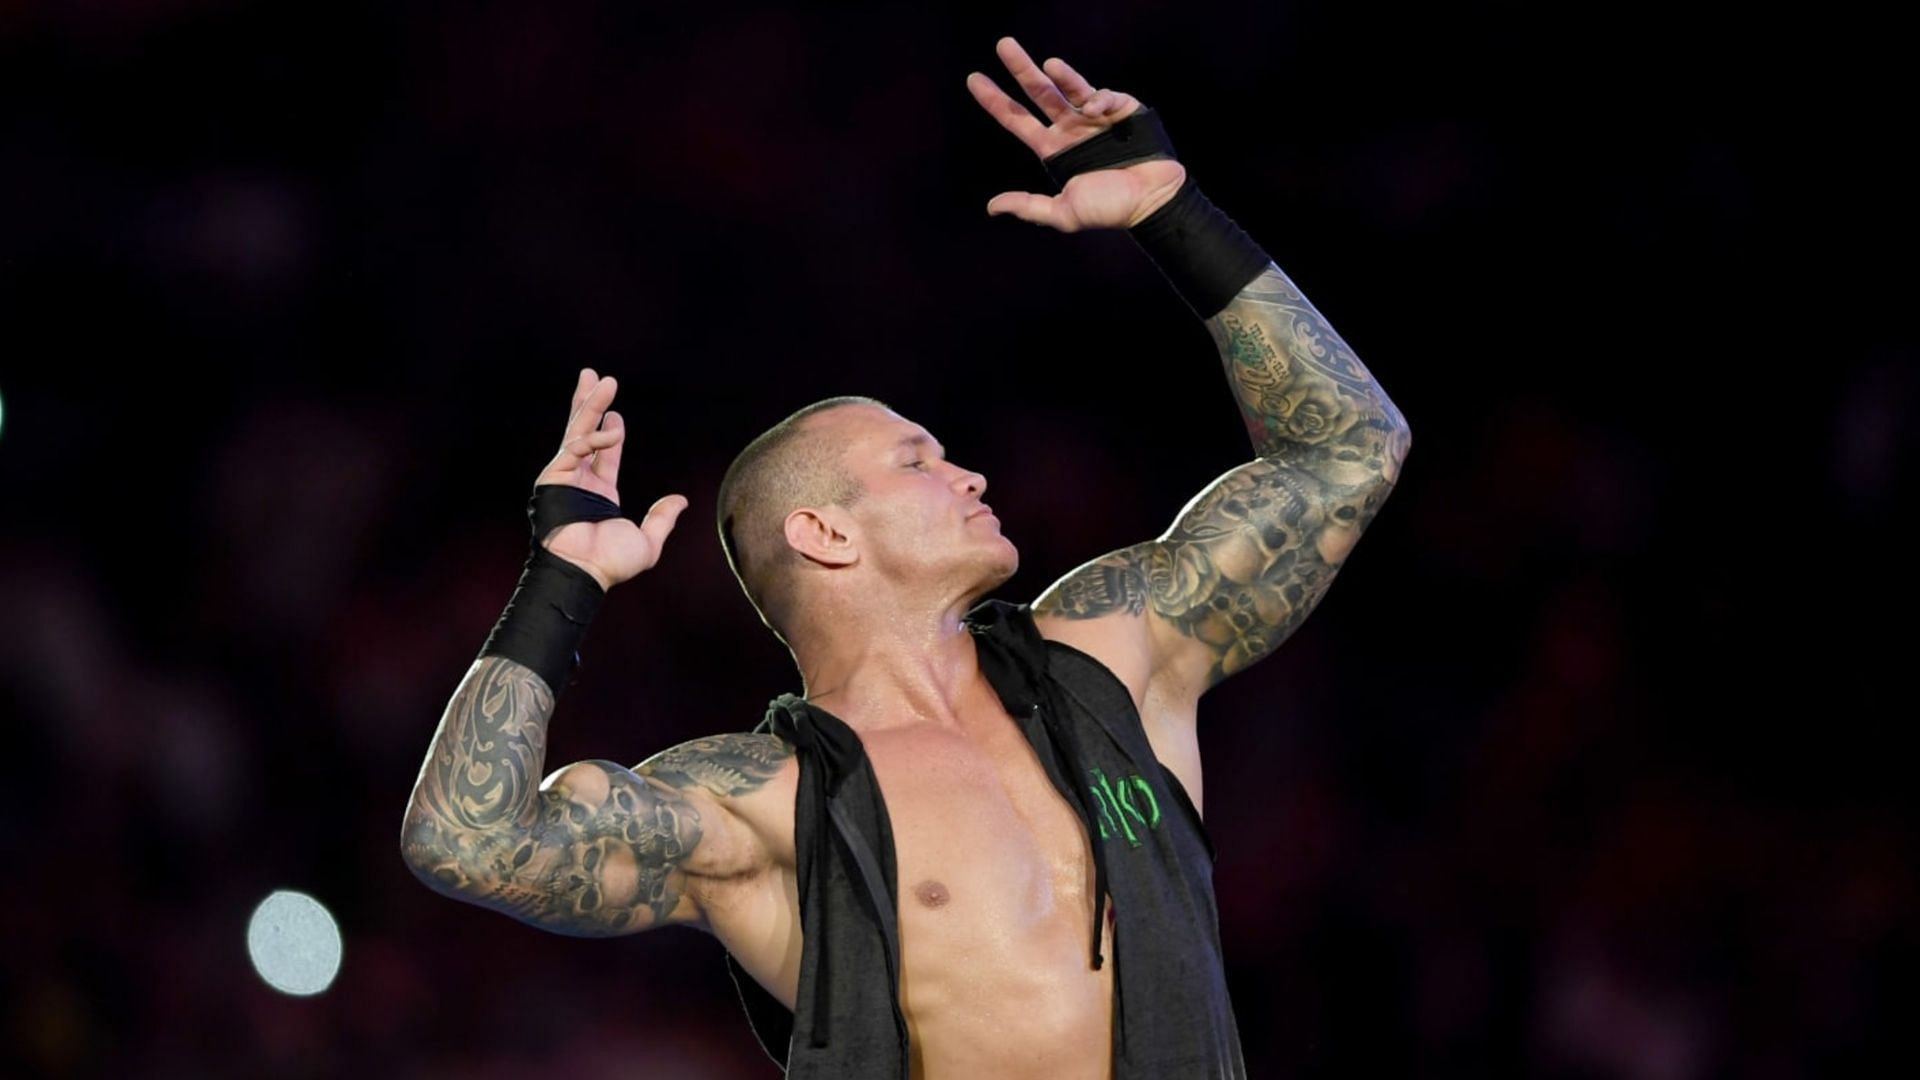 Randy Orton is a 14-time world champion in WWE.